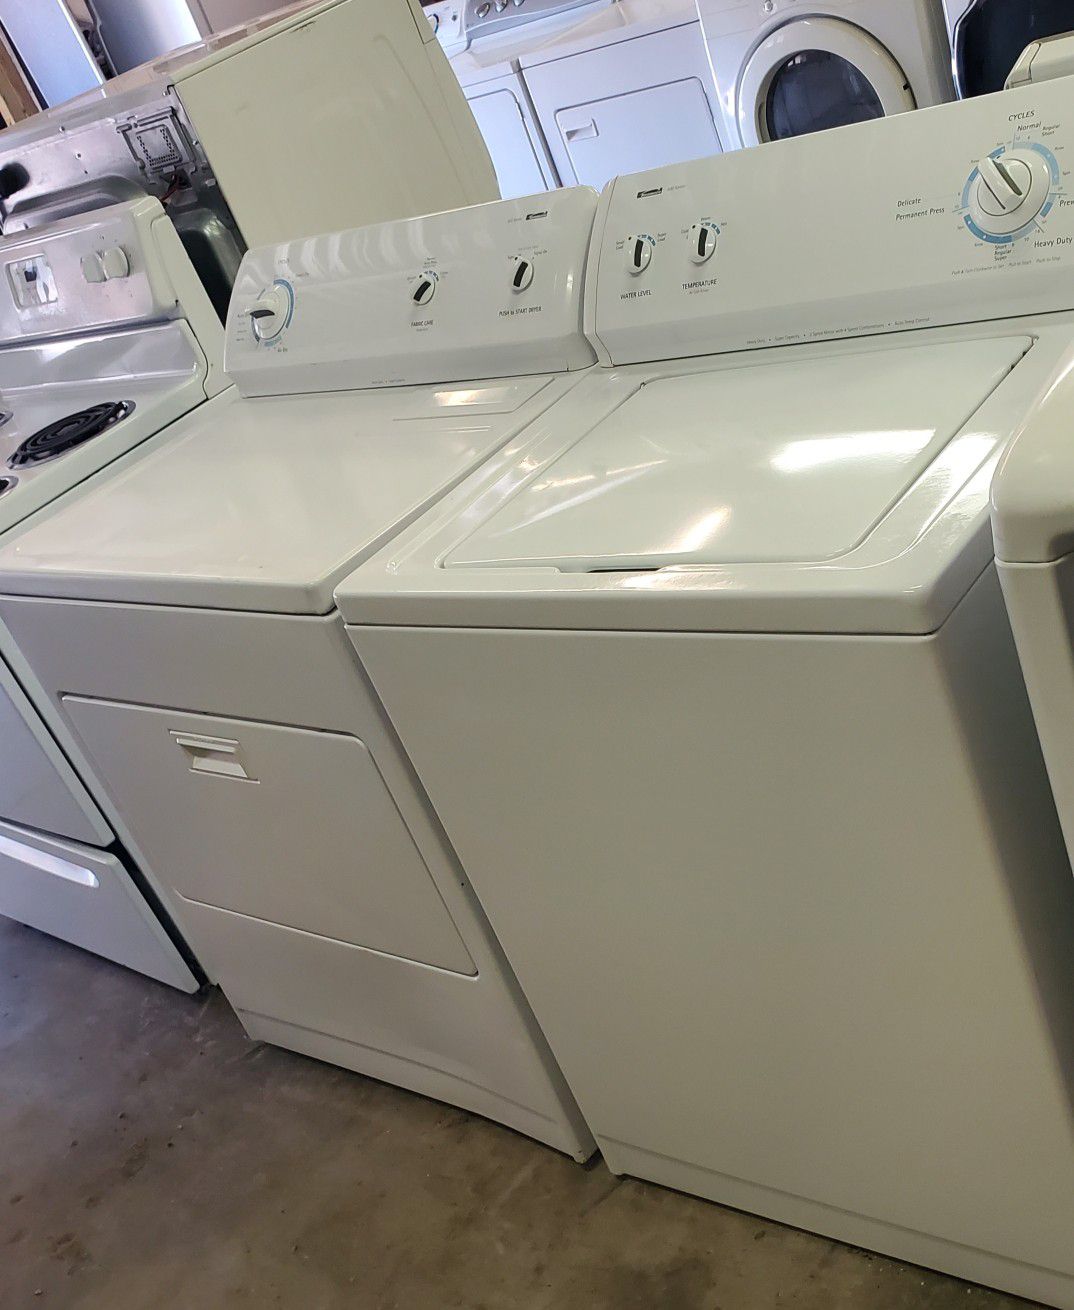 Kenmore washer and dryer set both works well